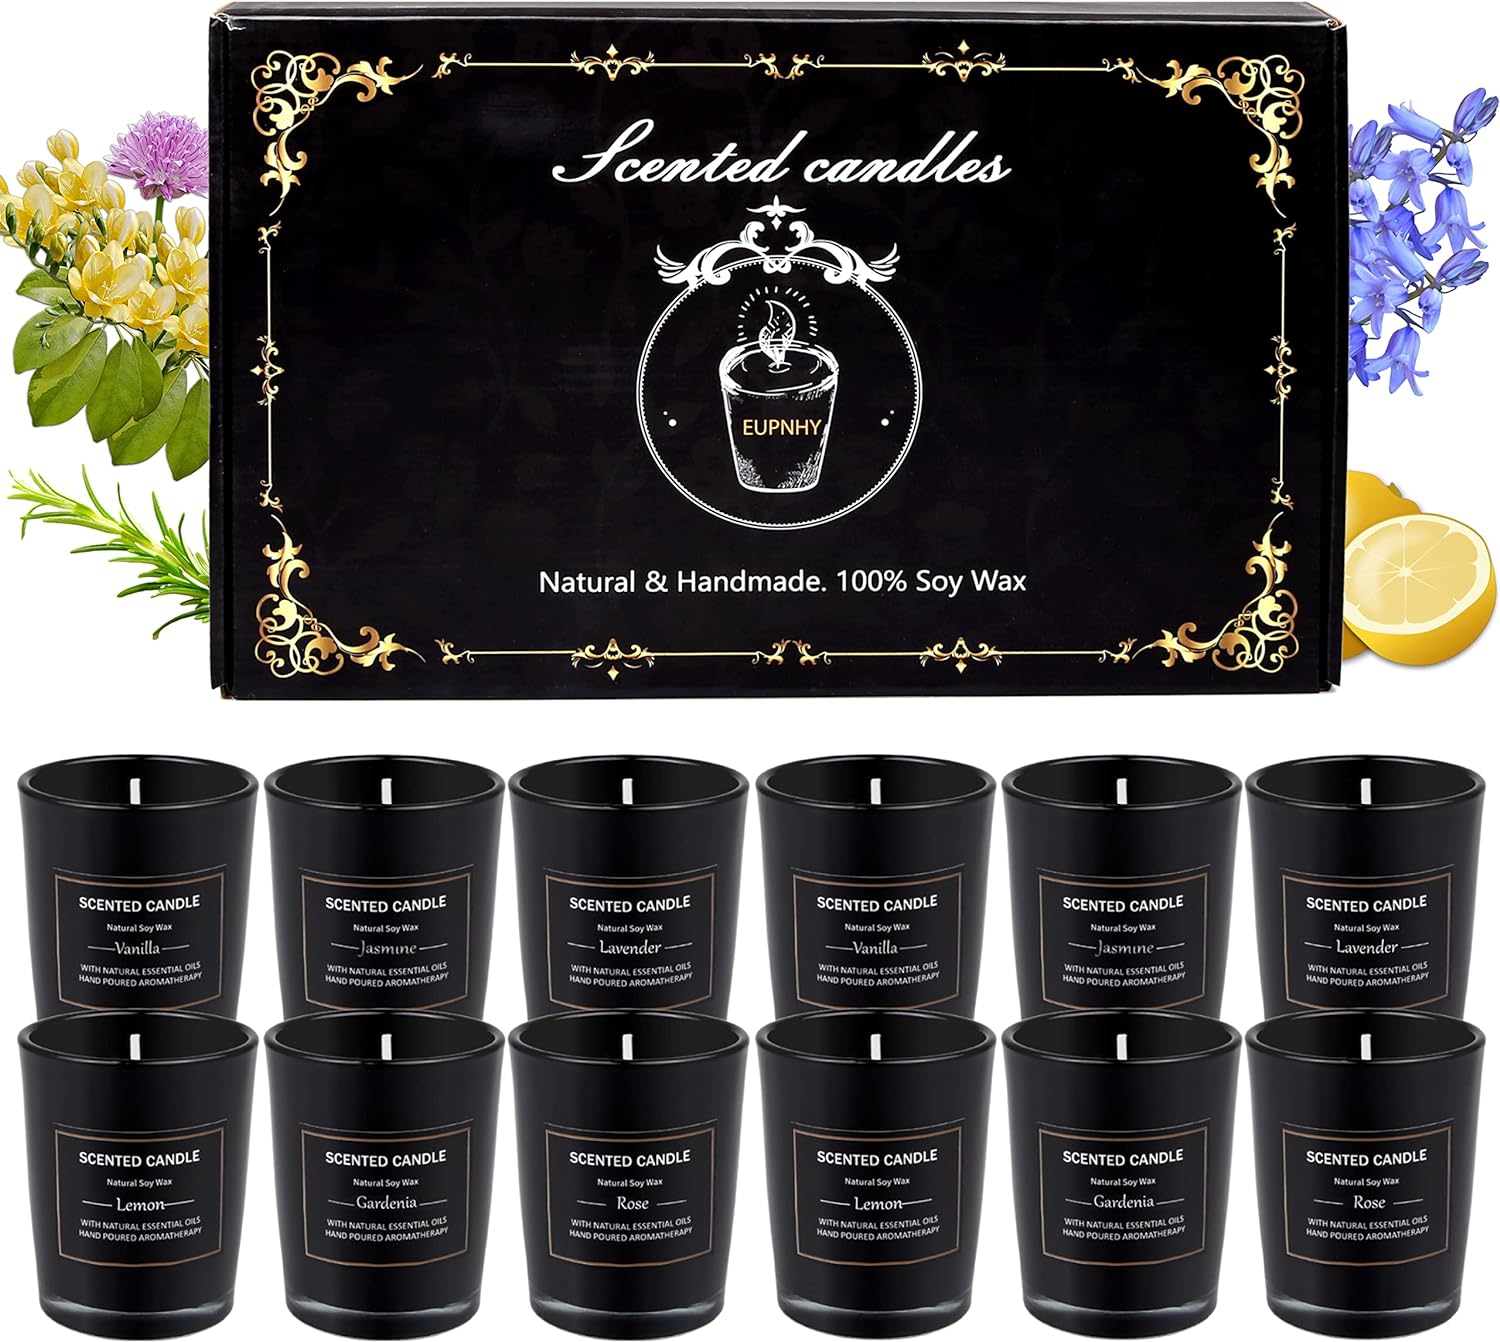 12 Pack Scented Candles Gift Set 2.5oz Strong Fragrance Aromatherapy Jar Candle Soy Wax Decorative for Home Bath and Body Works Best Gifts Women.